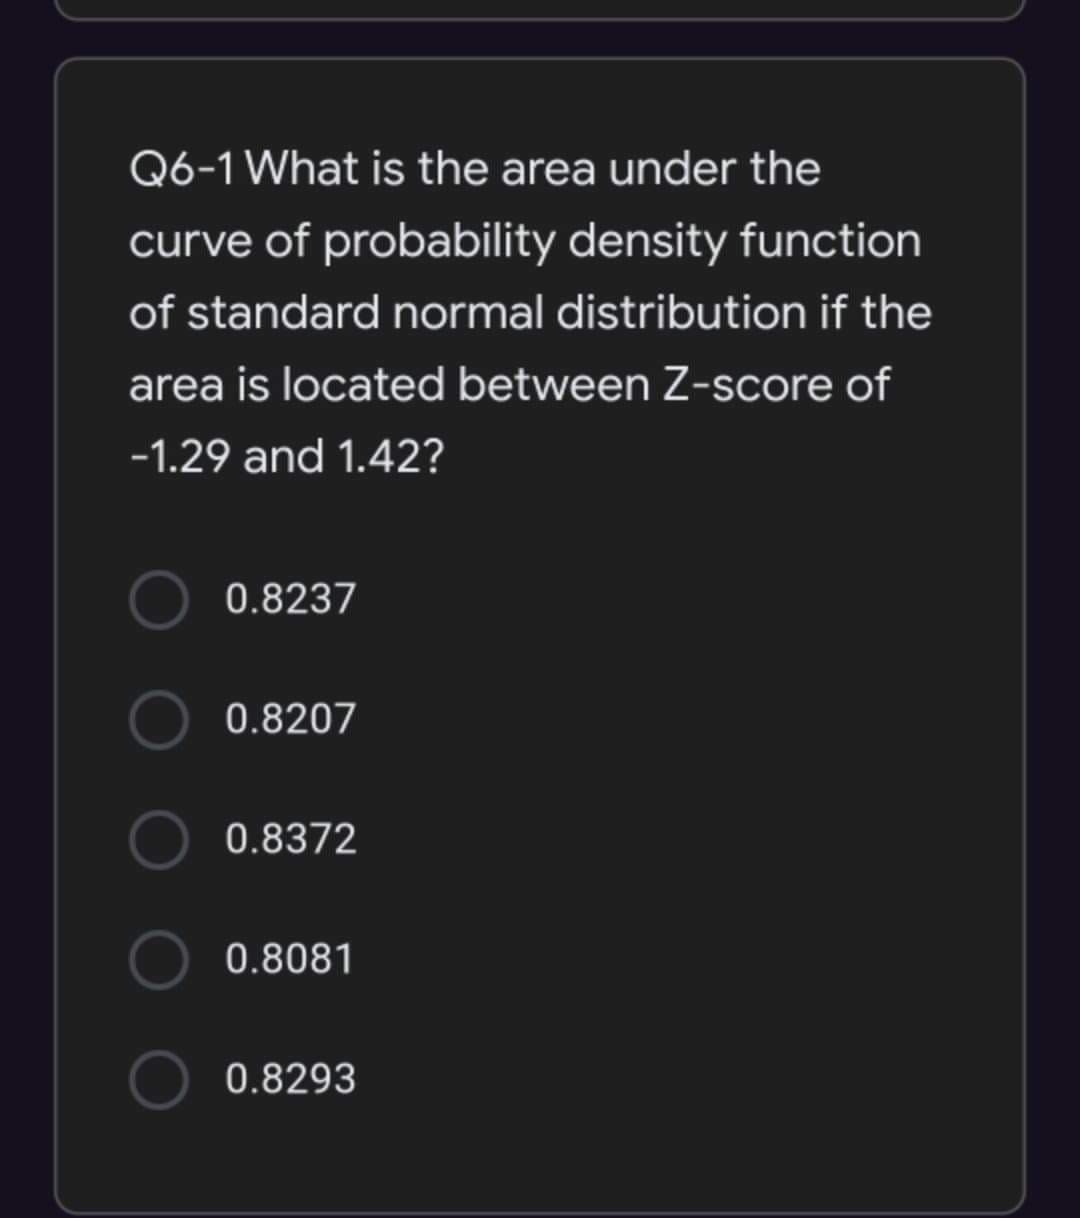 Q6-1 What is the area under the
curve of probability density function
of standard normal distribution if the
area is located between Z-score of
-1.29 and 1.42?
